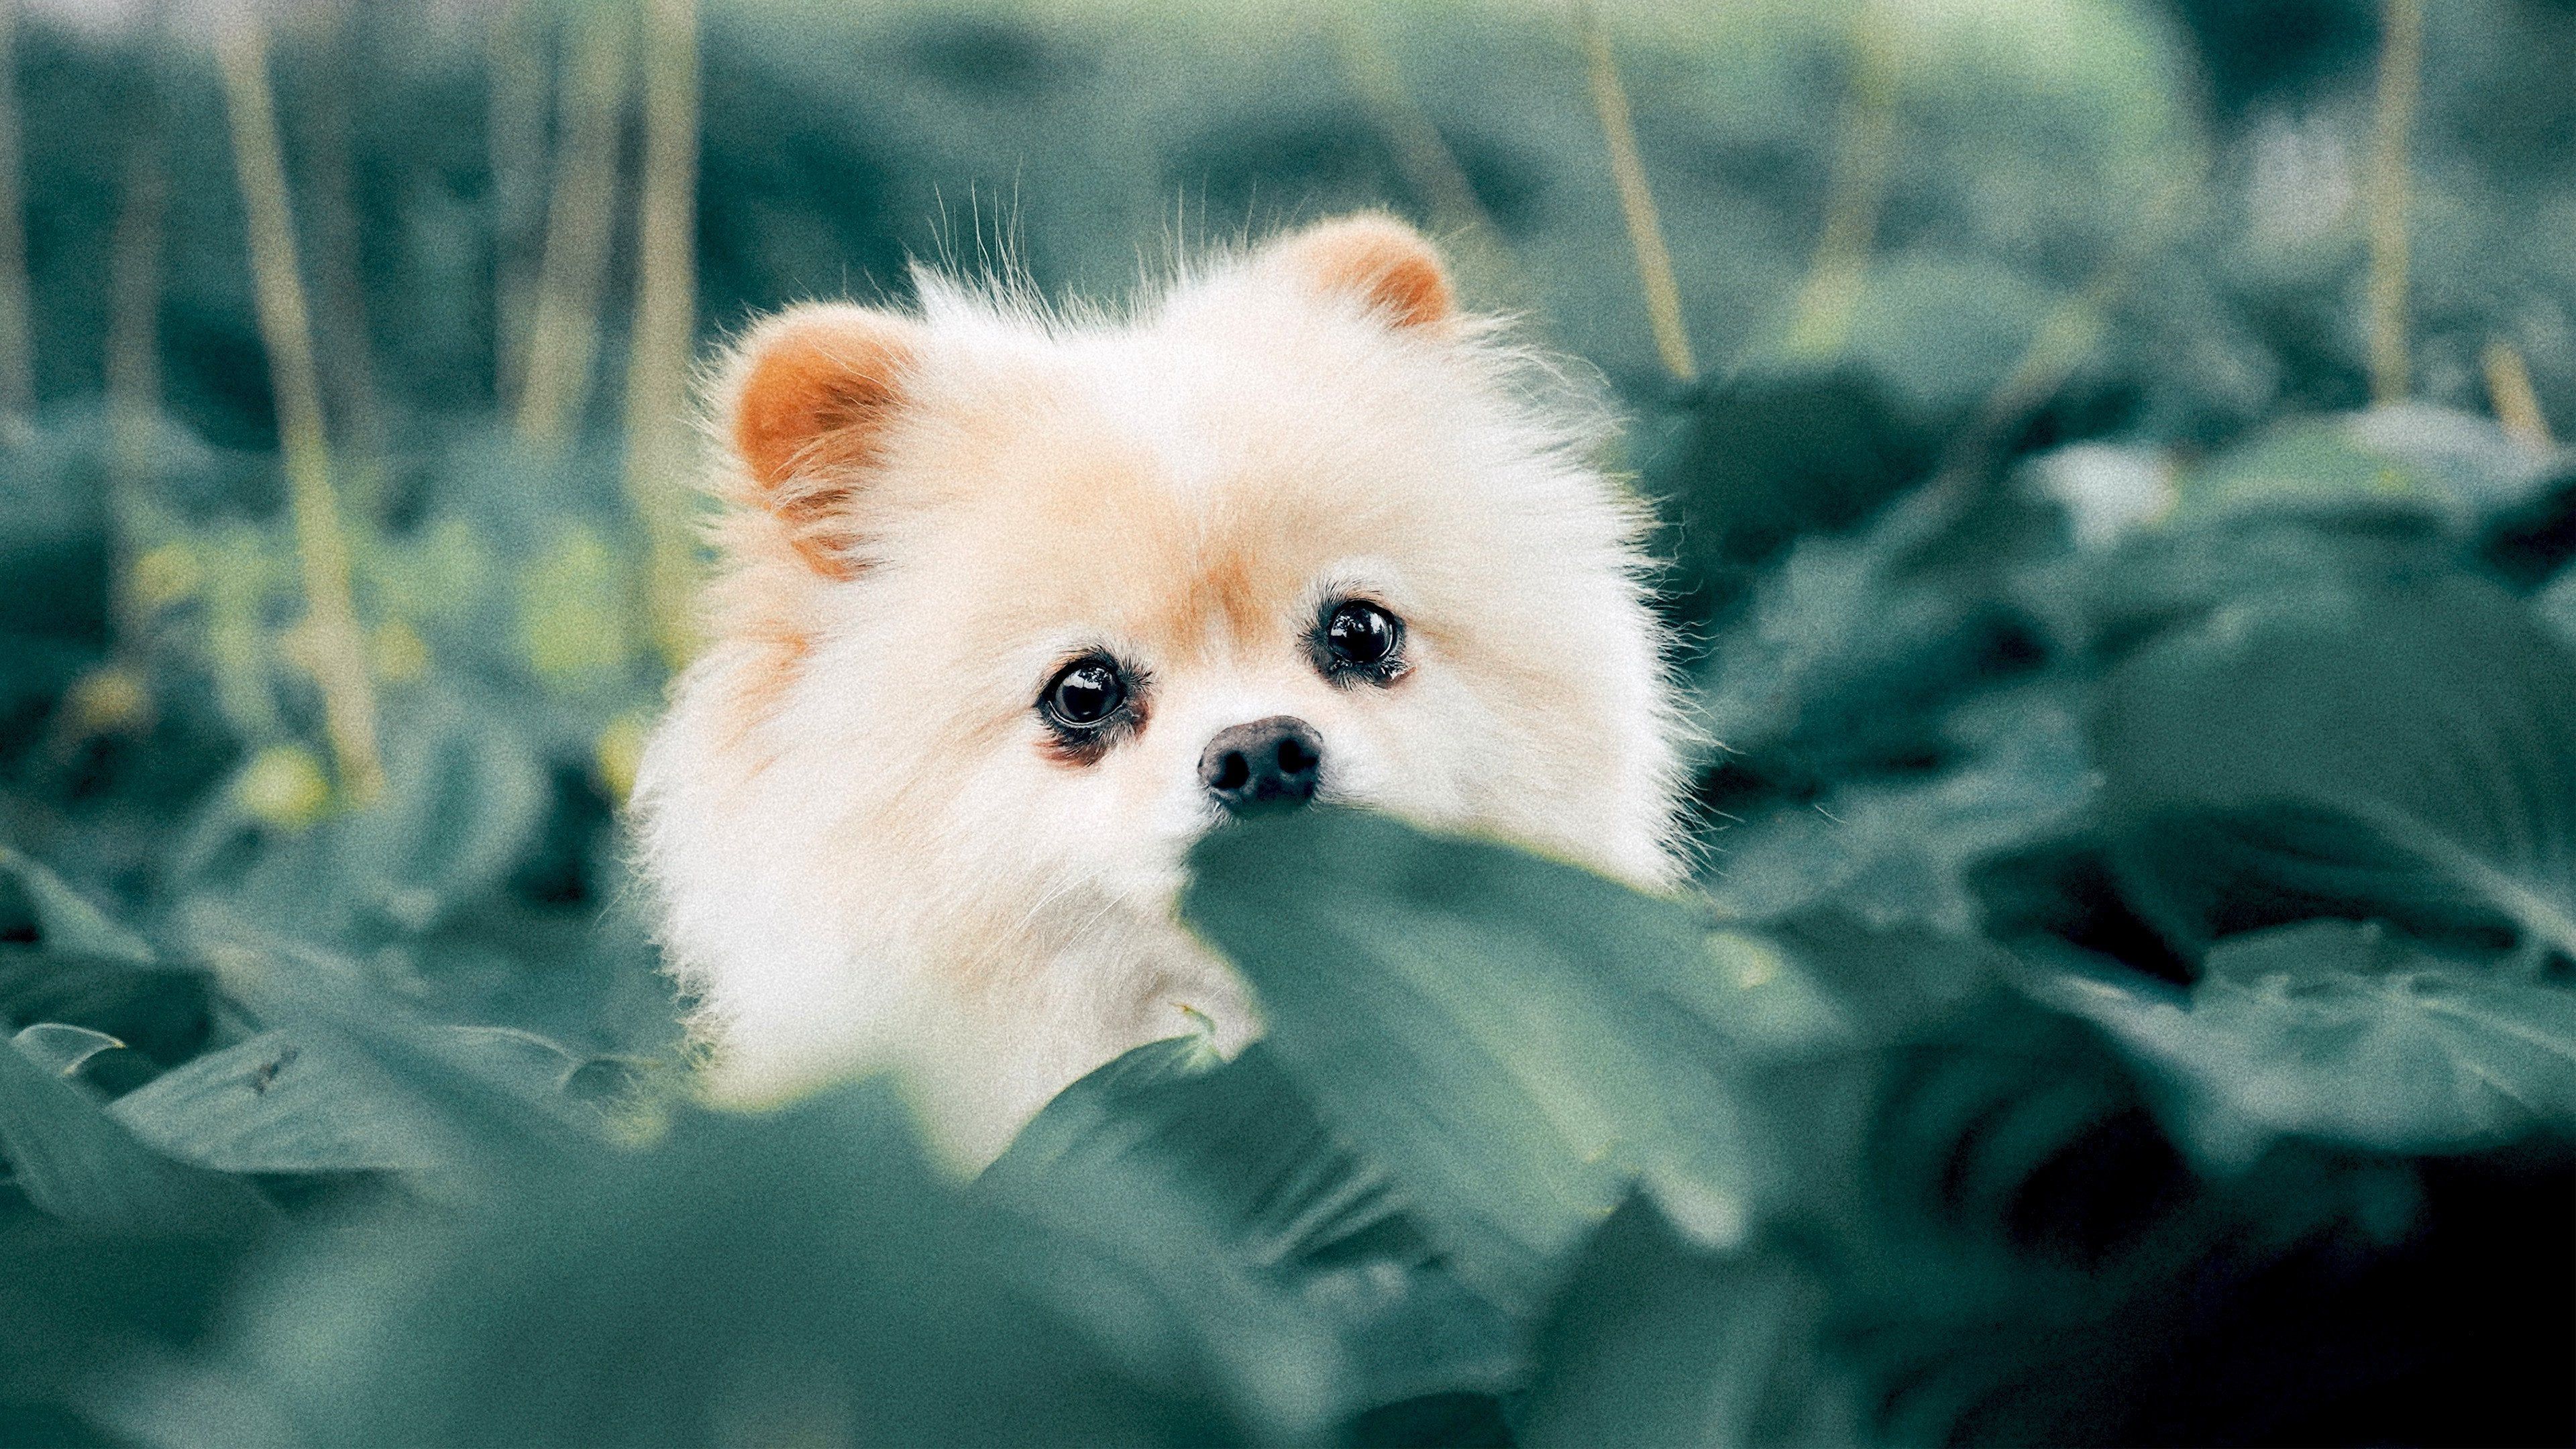 Puppy 4K wallpaper for your desktop or mobile screen free and easy to download